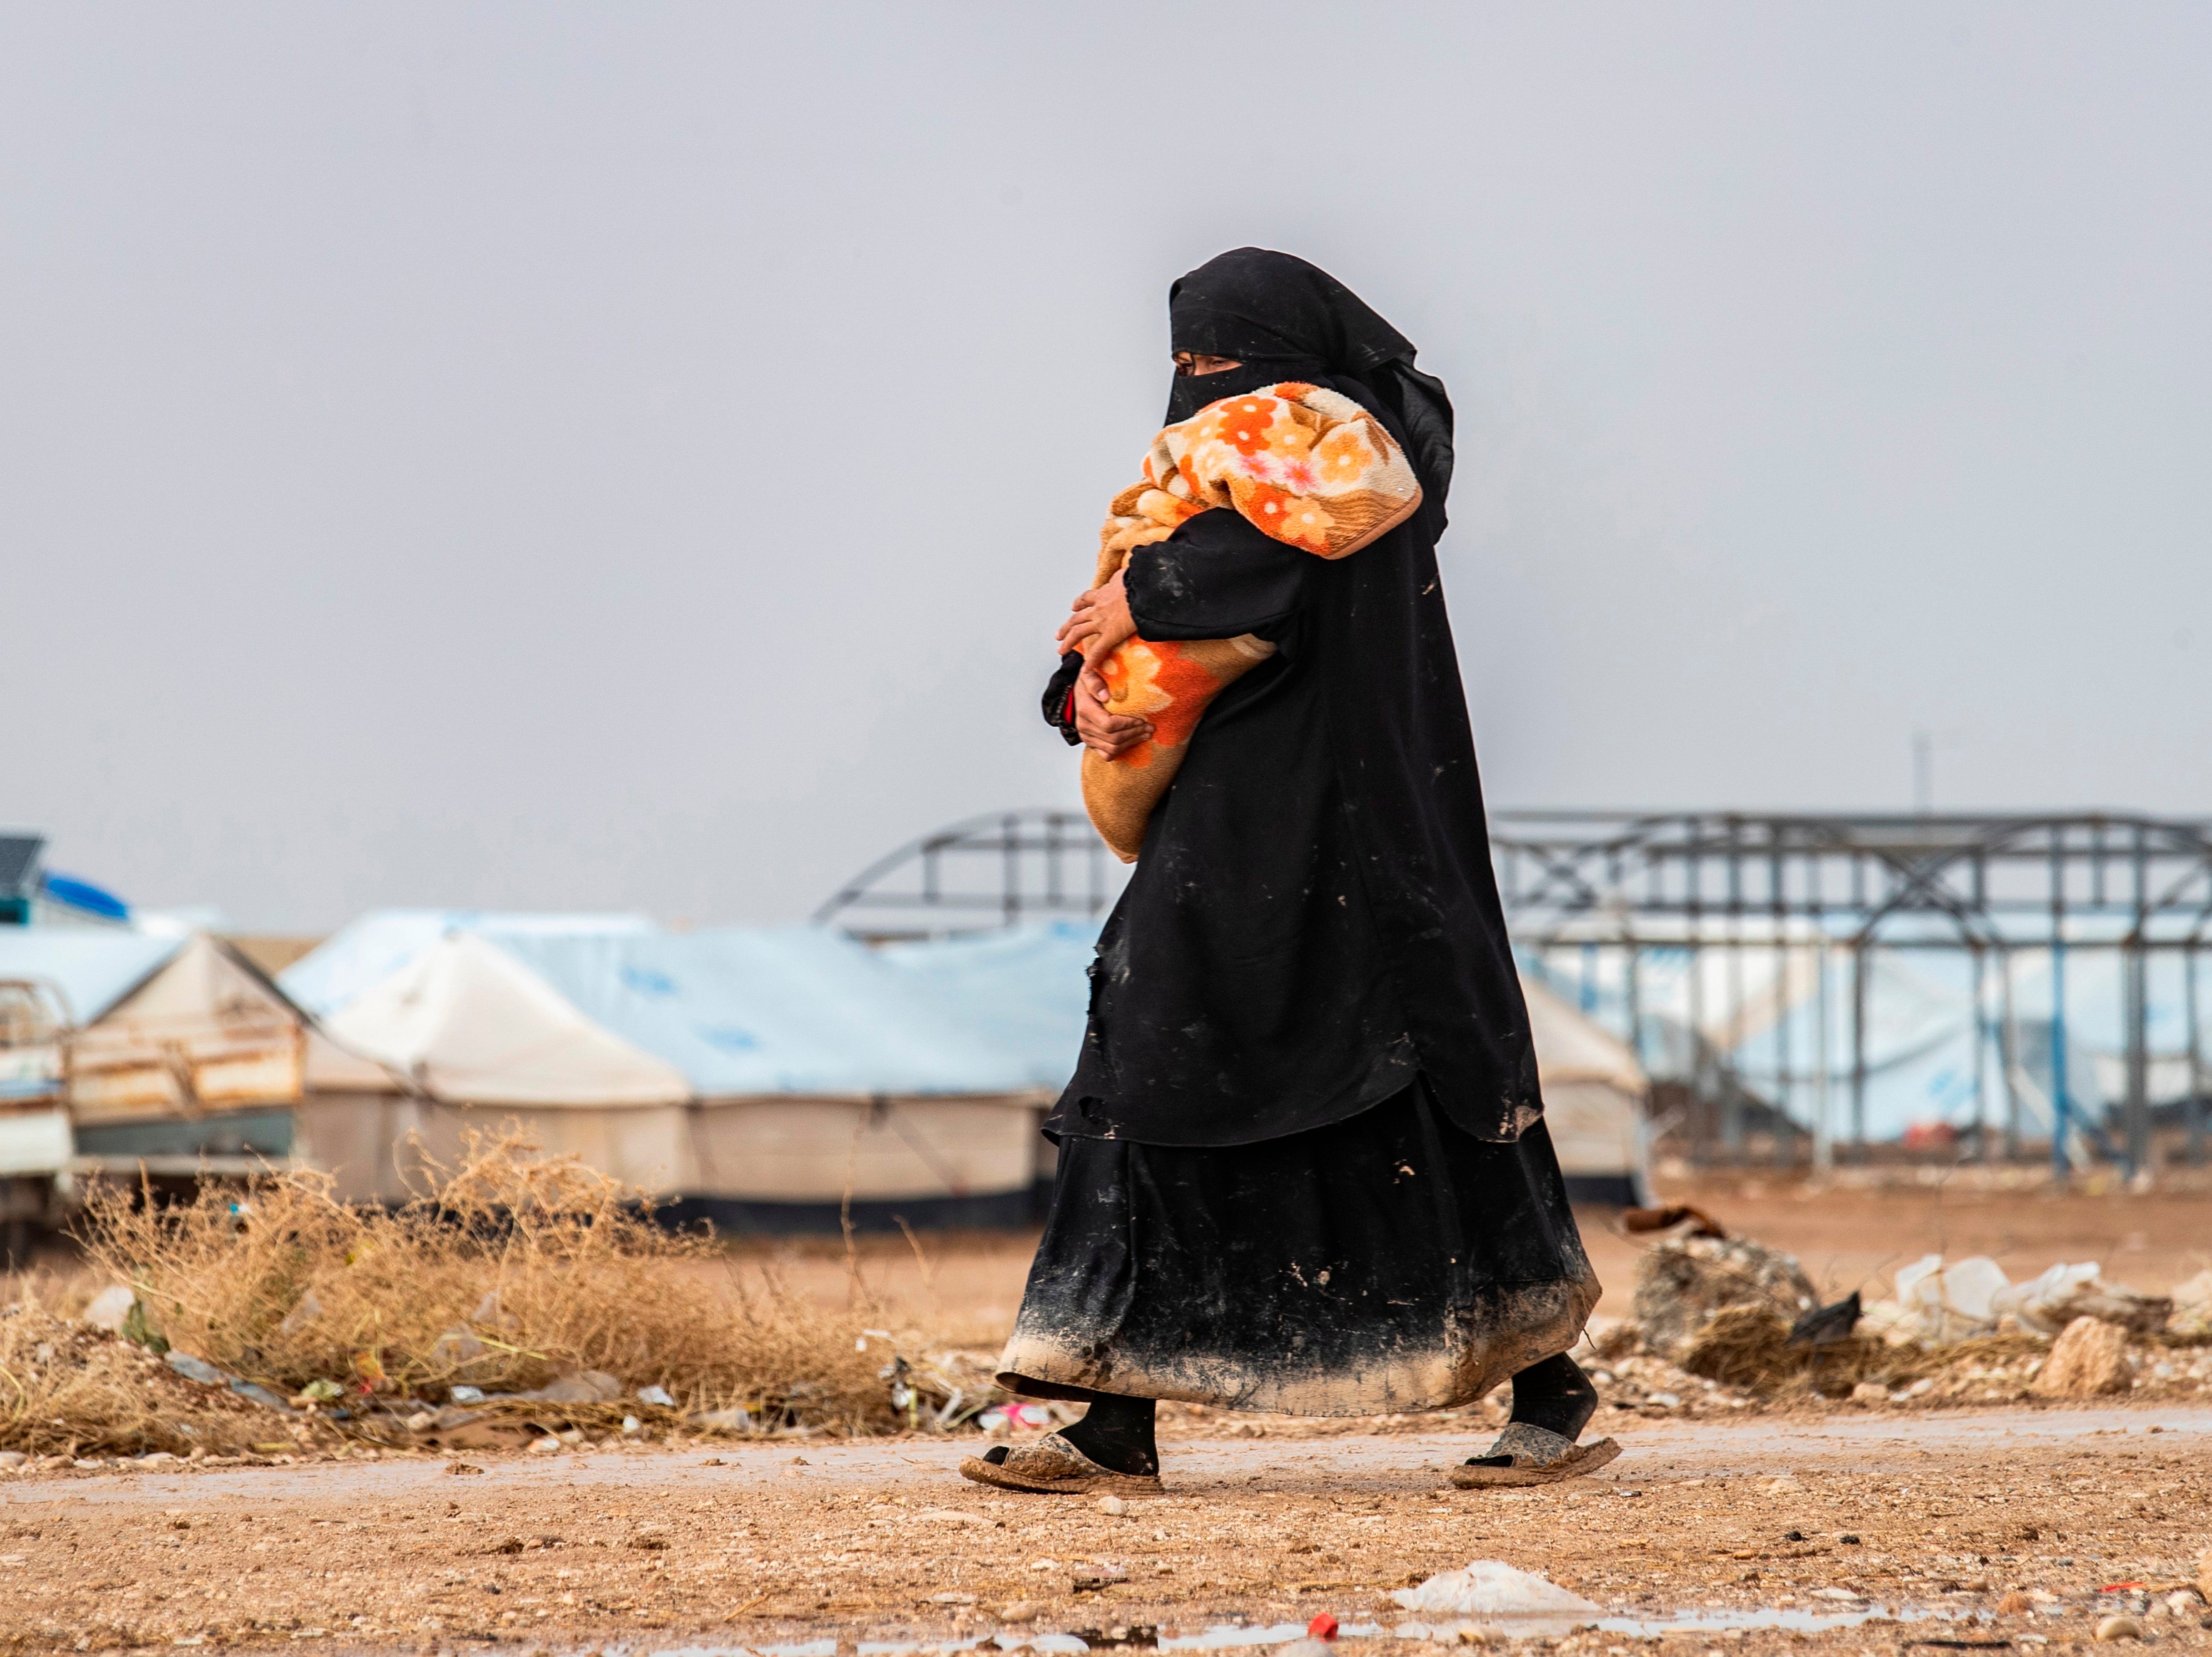 A woman carrying a toddler walks at the Kurdish-run al-Hol camp for the displaced where families of Islamic State (IS) foreign fighters are held, in the al-Hasakeh governorate in northeastern Syria on 9 December 2019